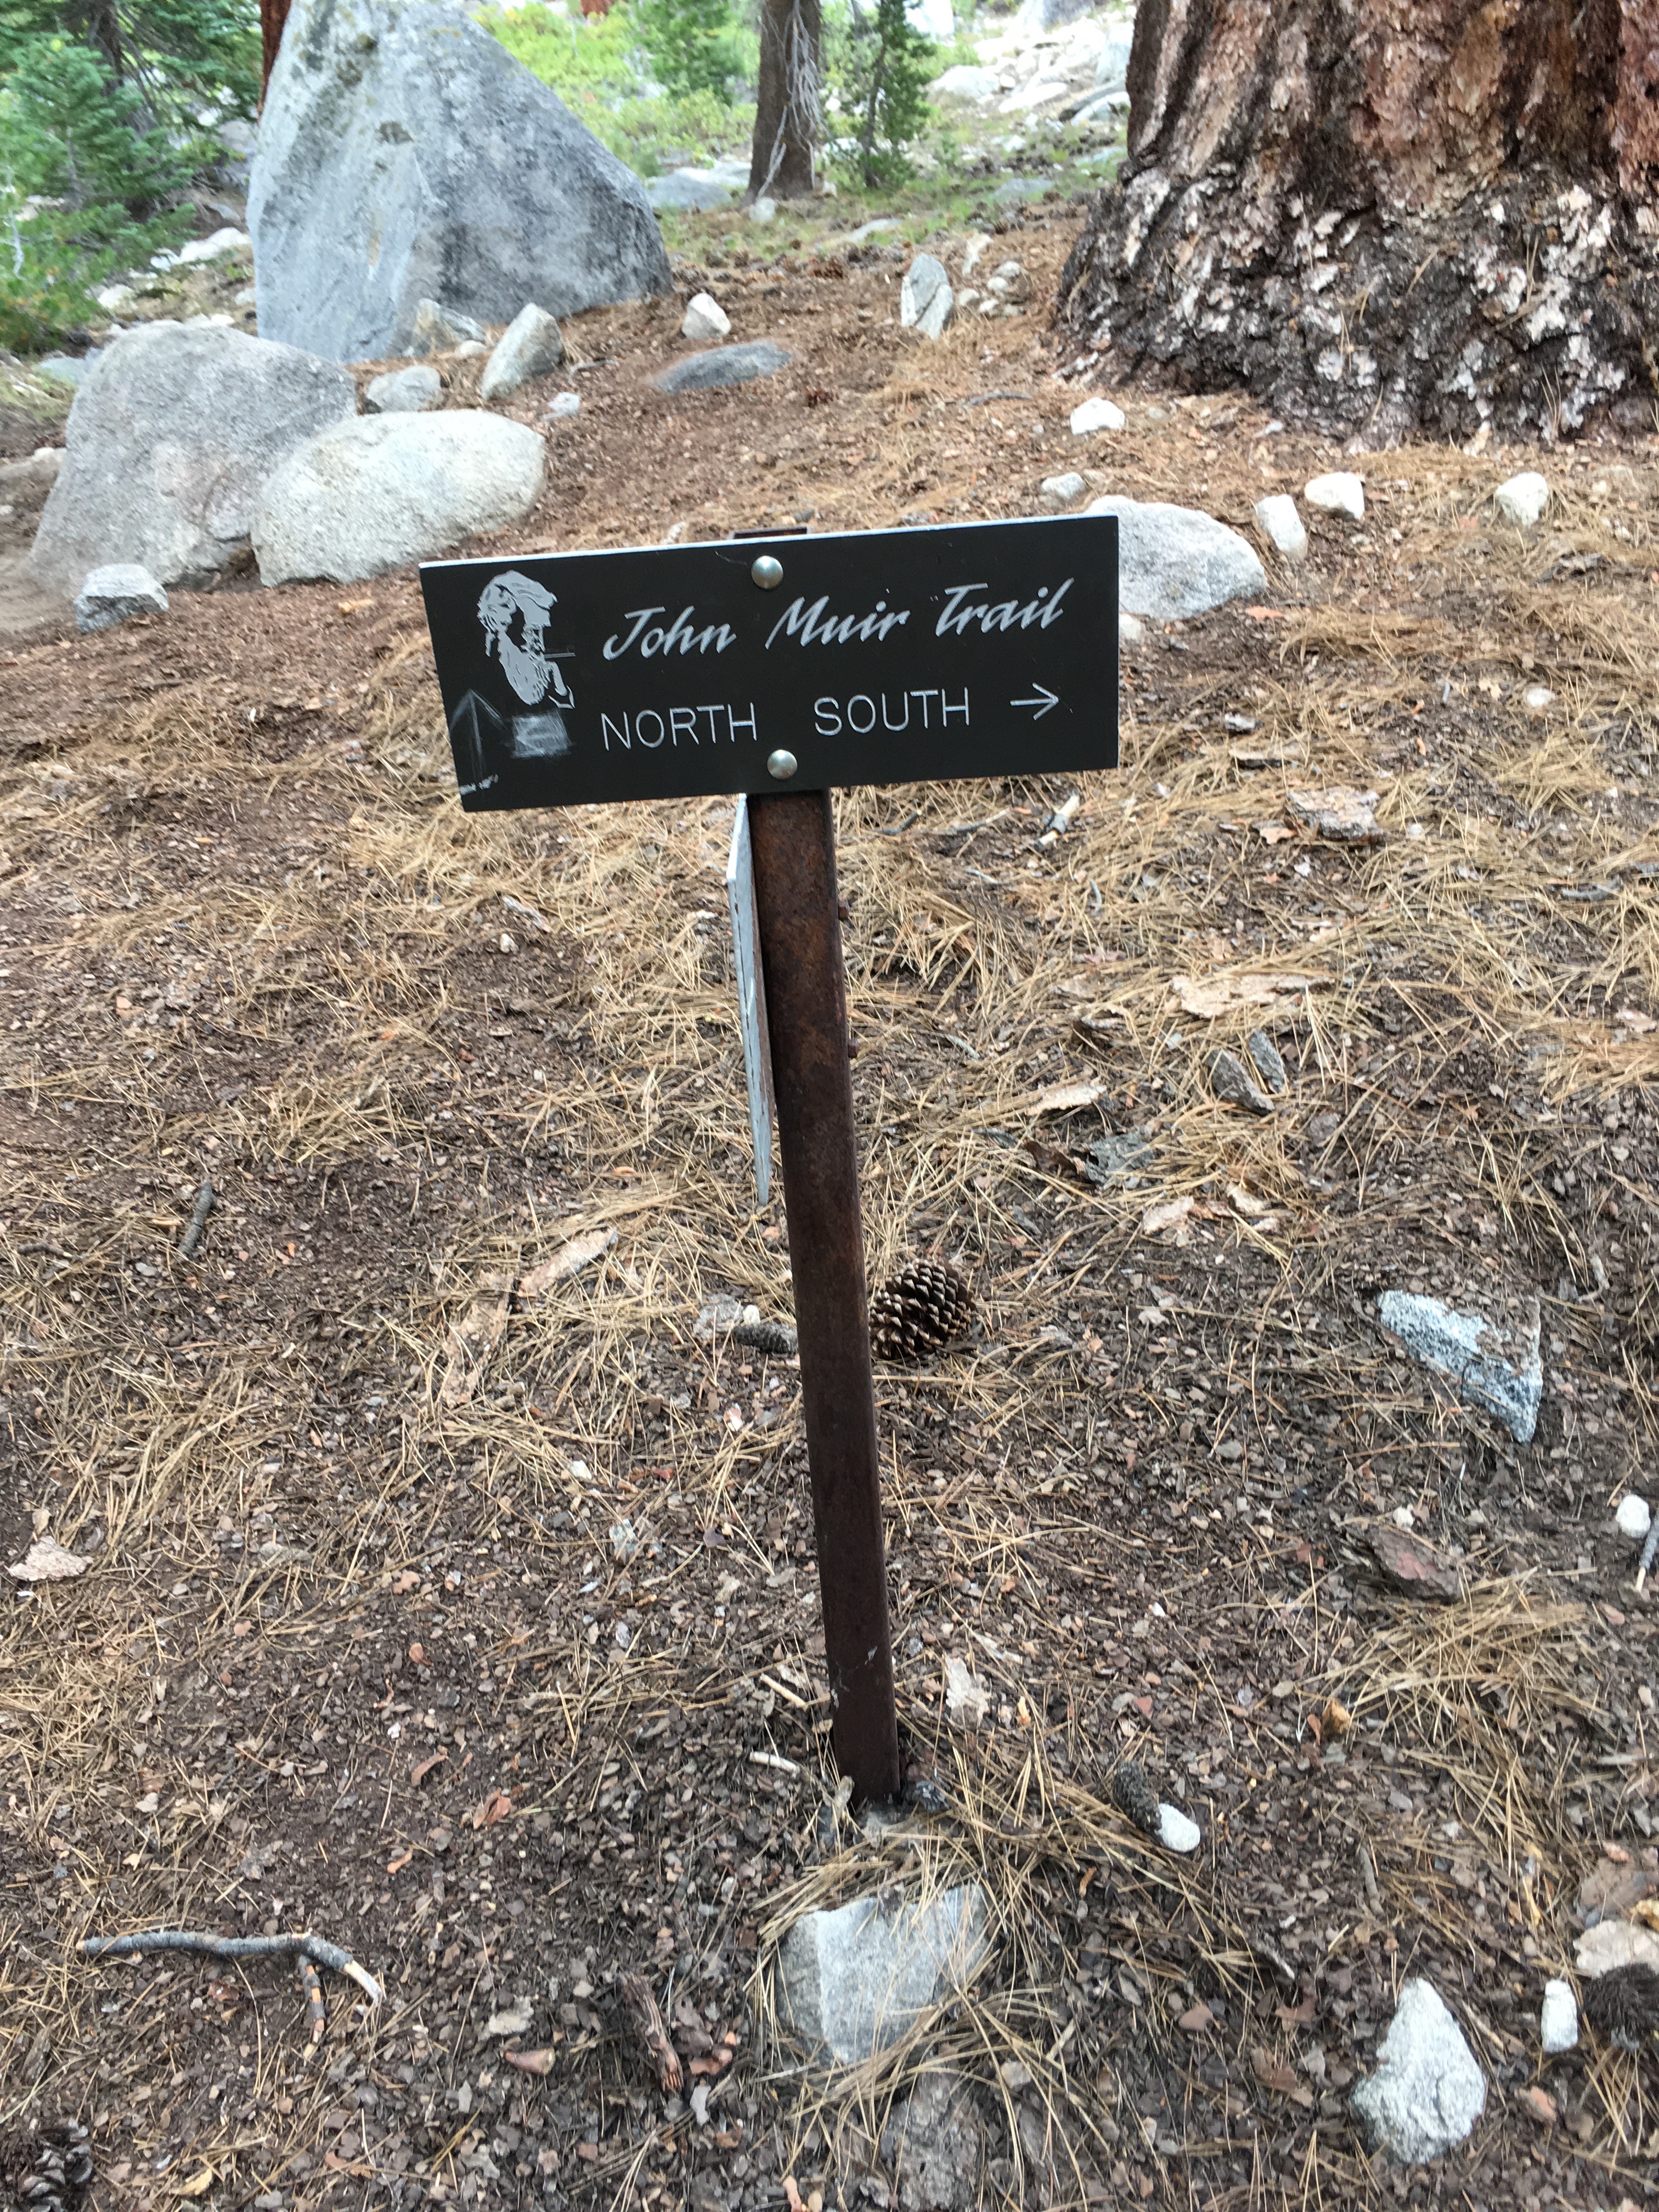 You have arrived at the John Muir Trail, pick a direction.